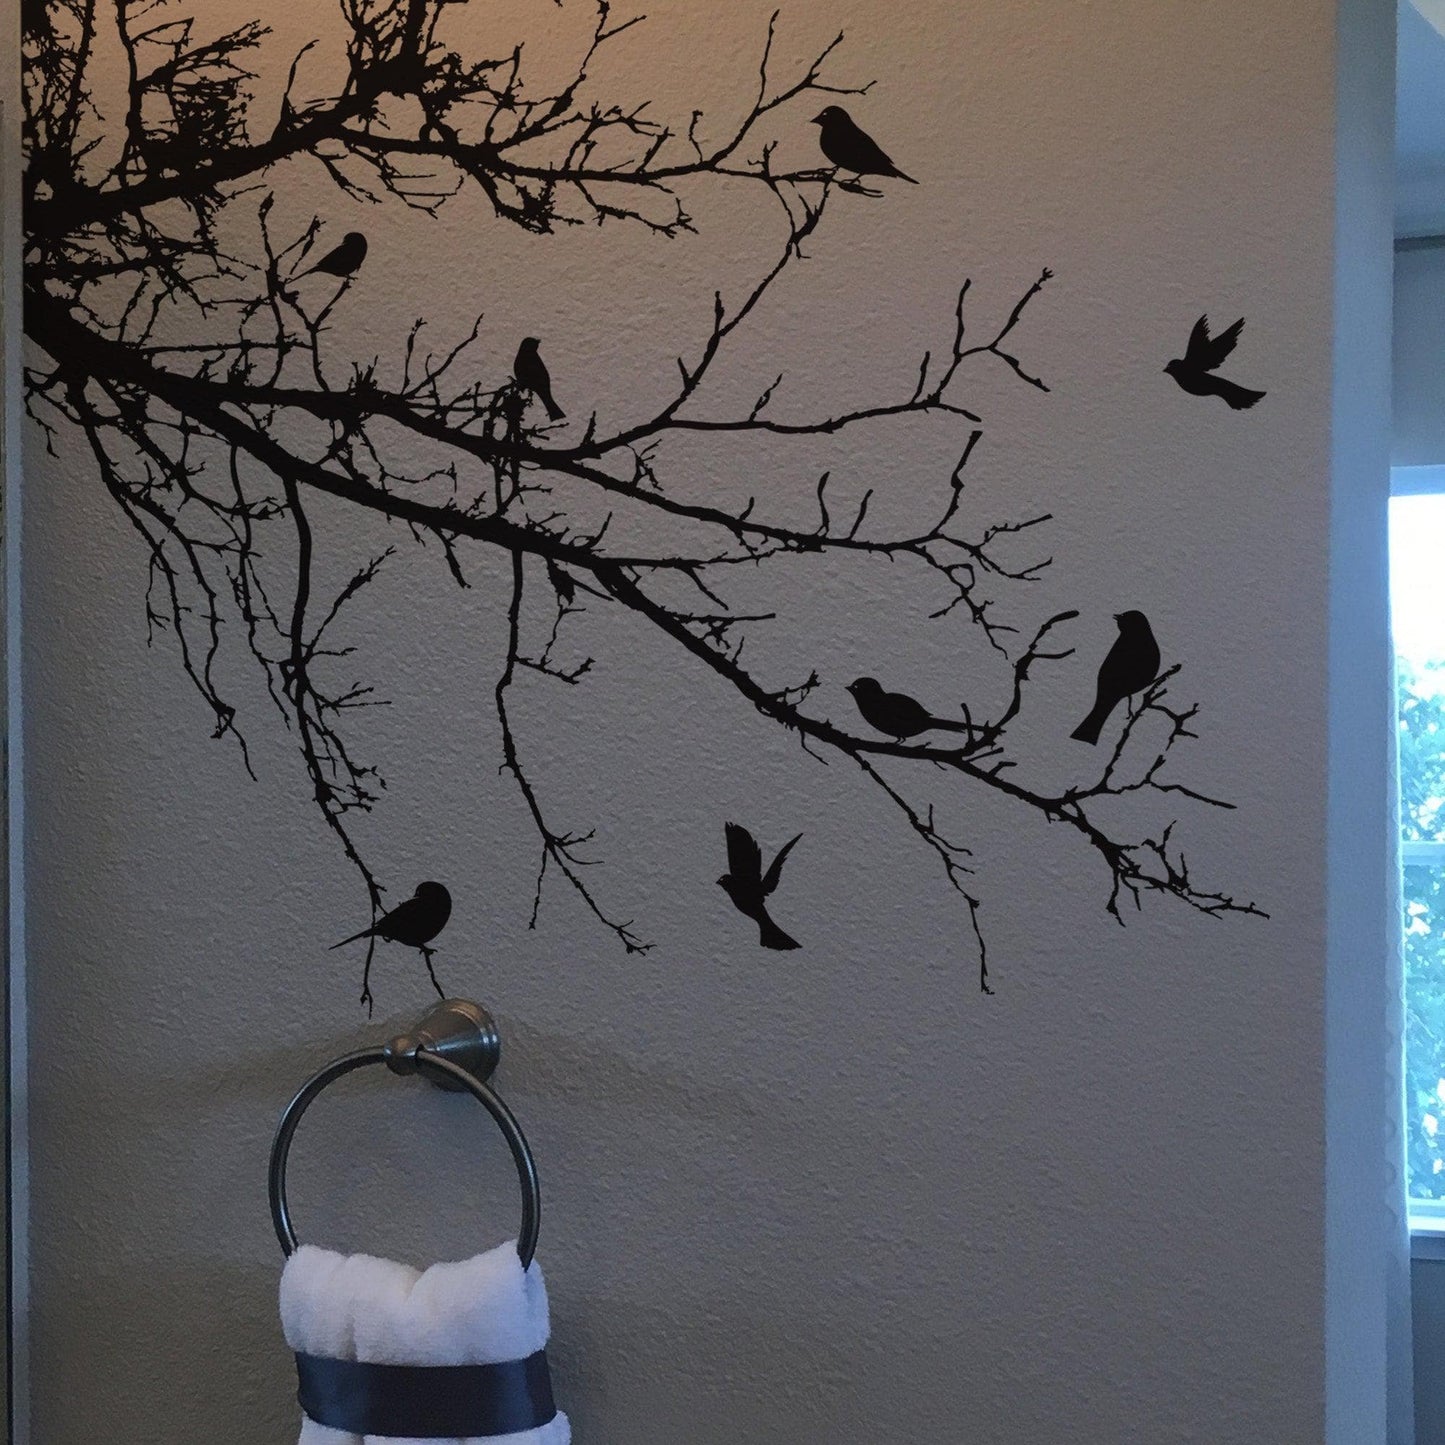 Black decal of 8 birds on tree branches on a white wall above a towel.